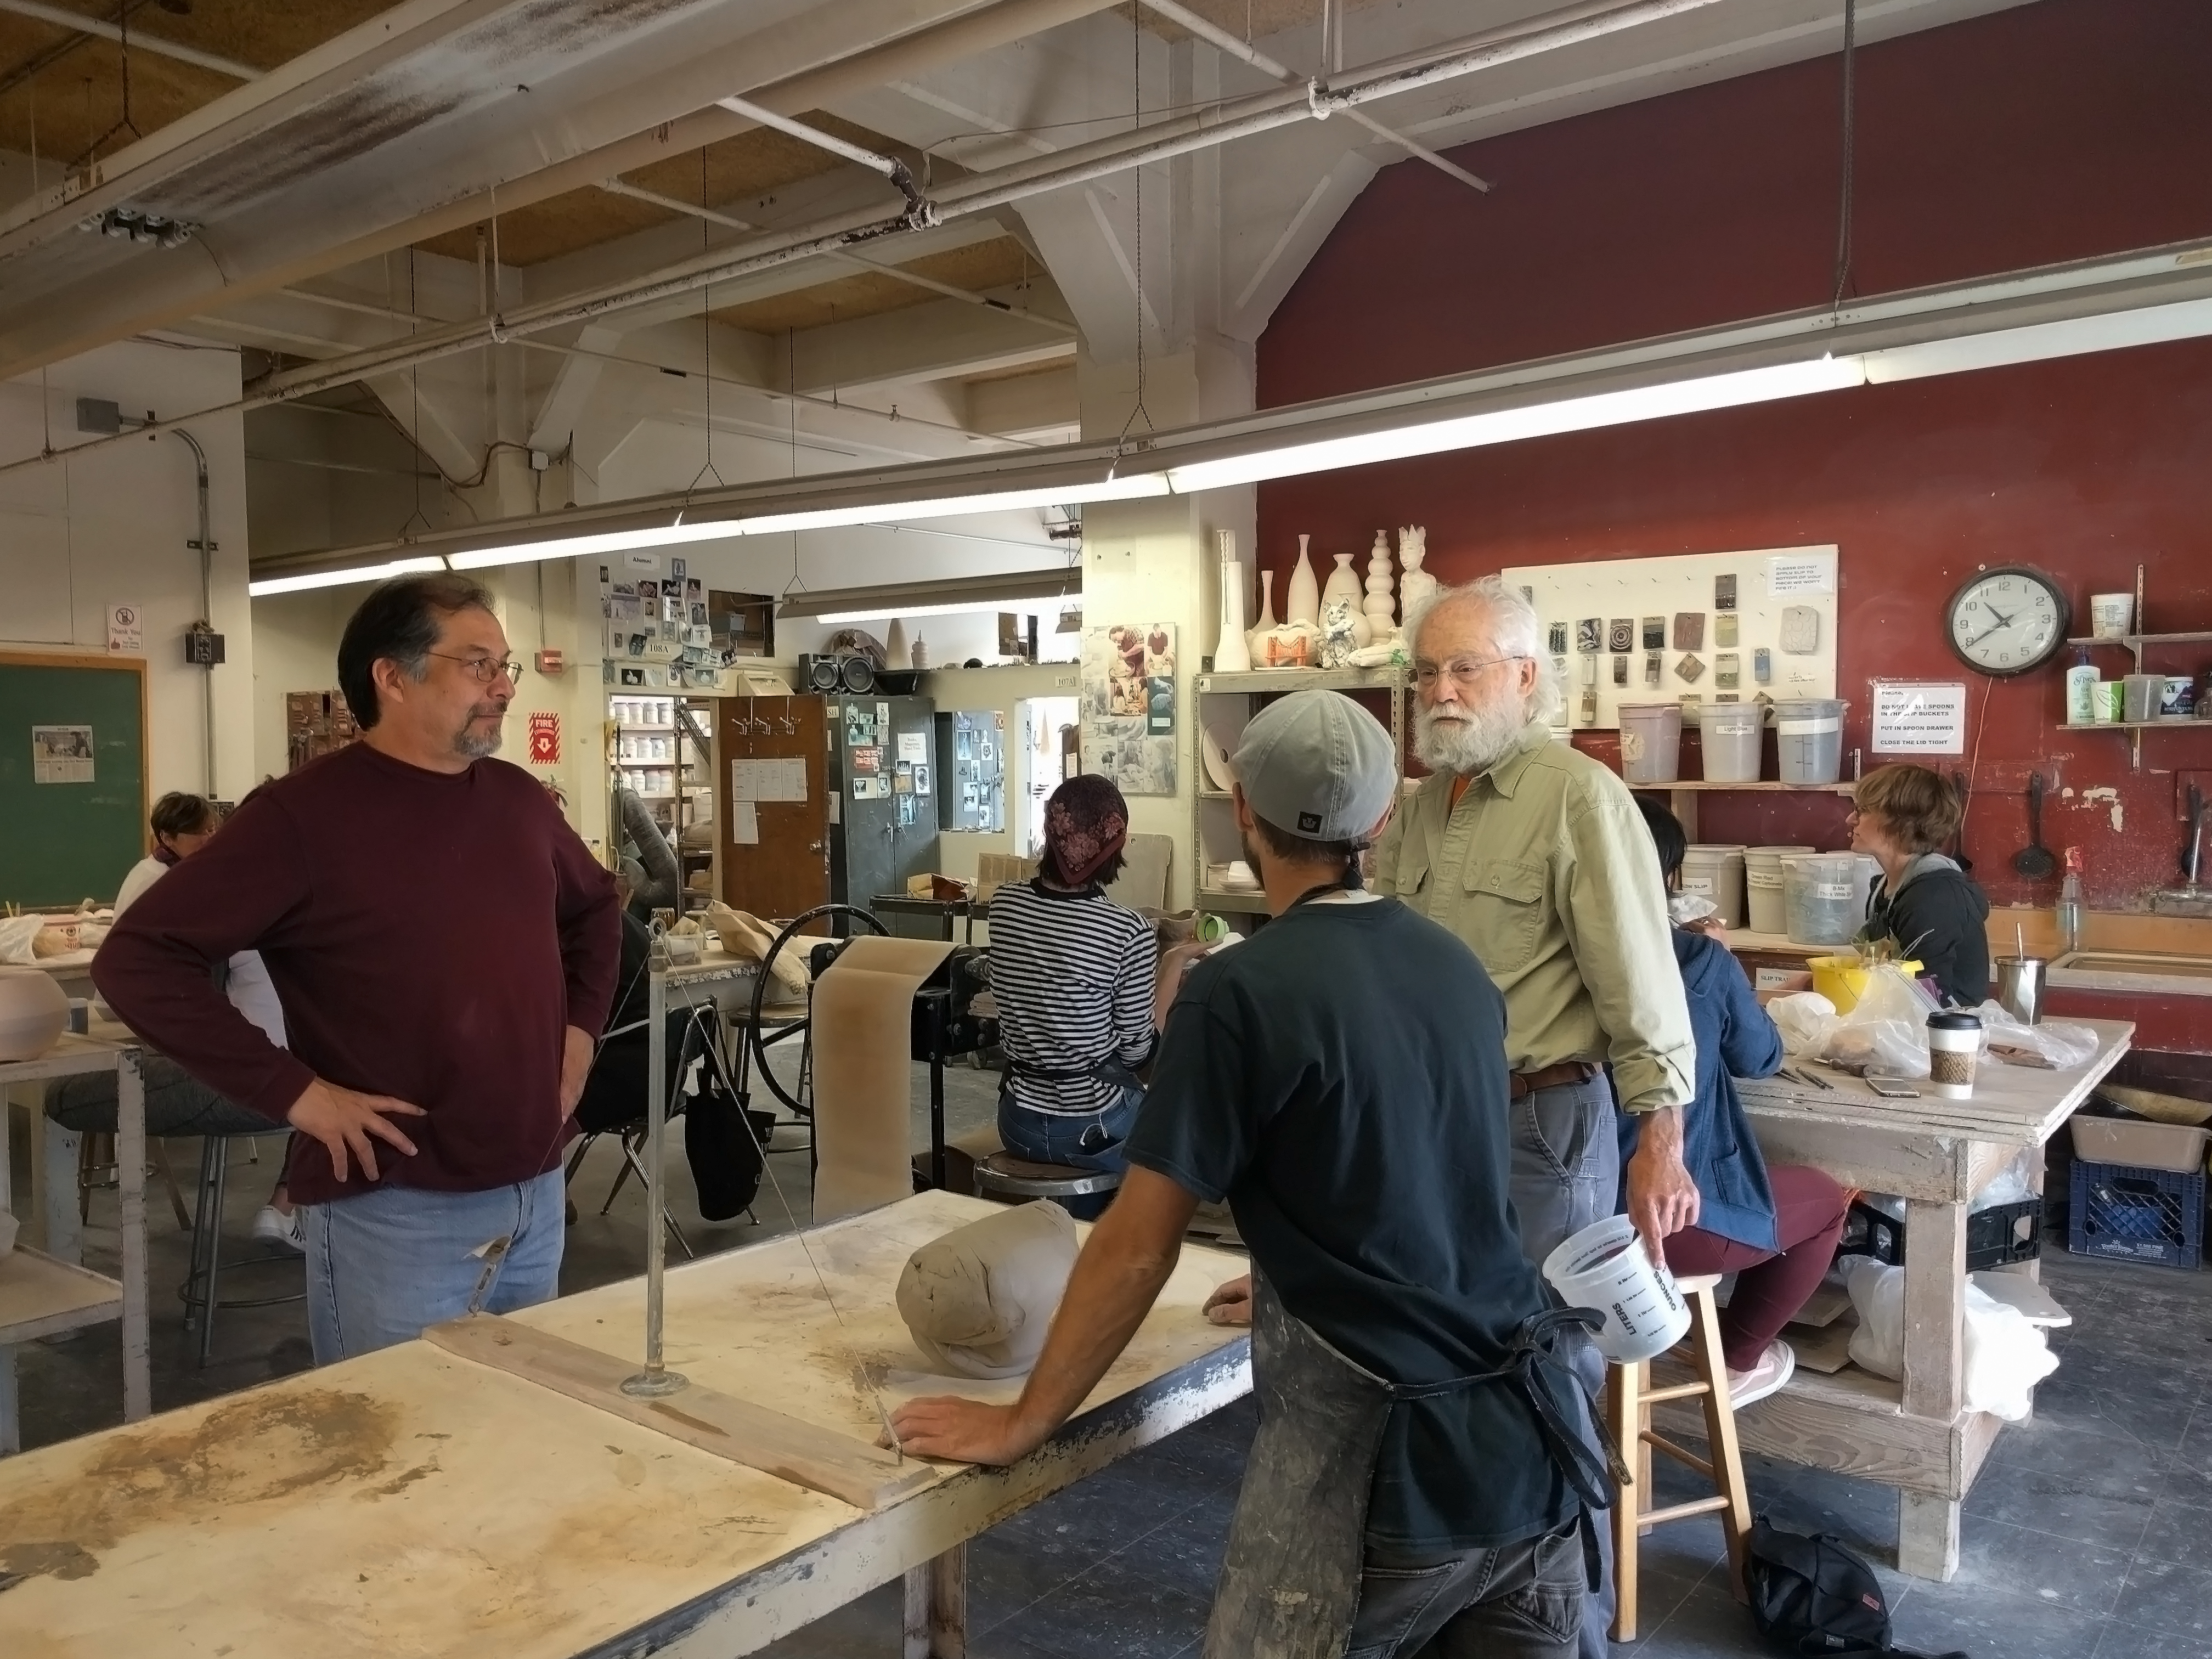 Instructor Olivero Quezada and his assistants instruct students in the spacious Fort Mason ceramics studio. Photo by Elena Stuart/The Guardsman 